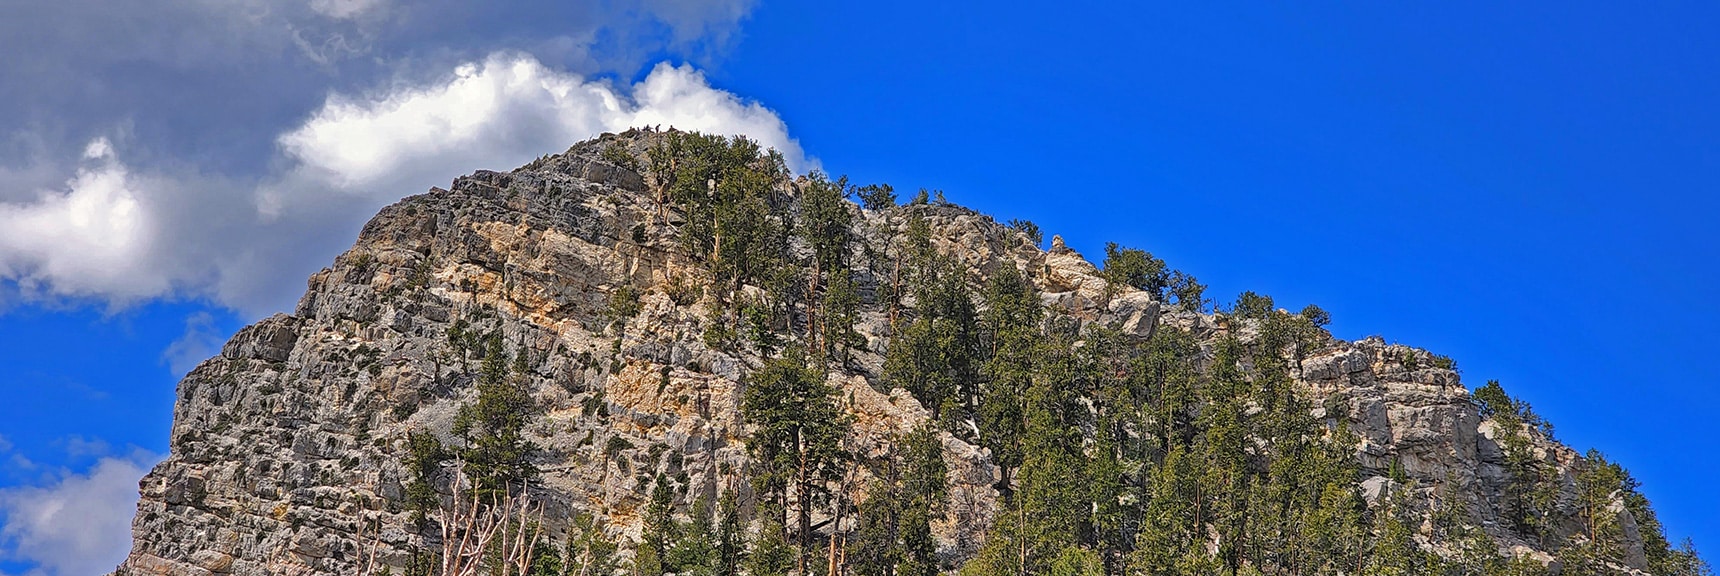 Close-up of Final Summit Approach Along Edge of Tree Line to Right of Cliffs | Sisters North | Lee Canyon | Mt Charleston Wilderness | Spring Mountains, Nevada